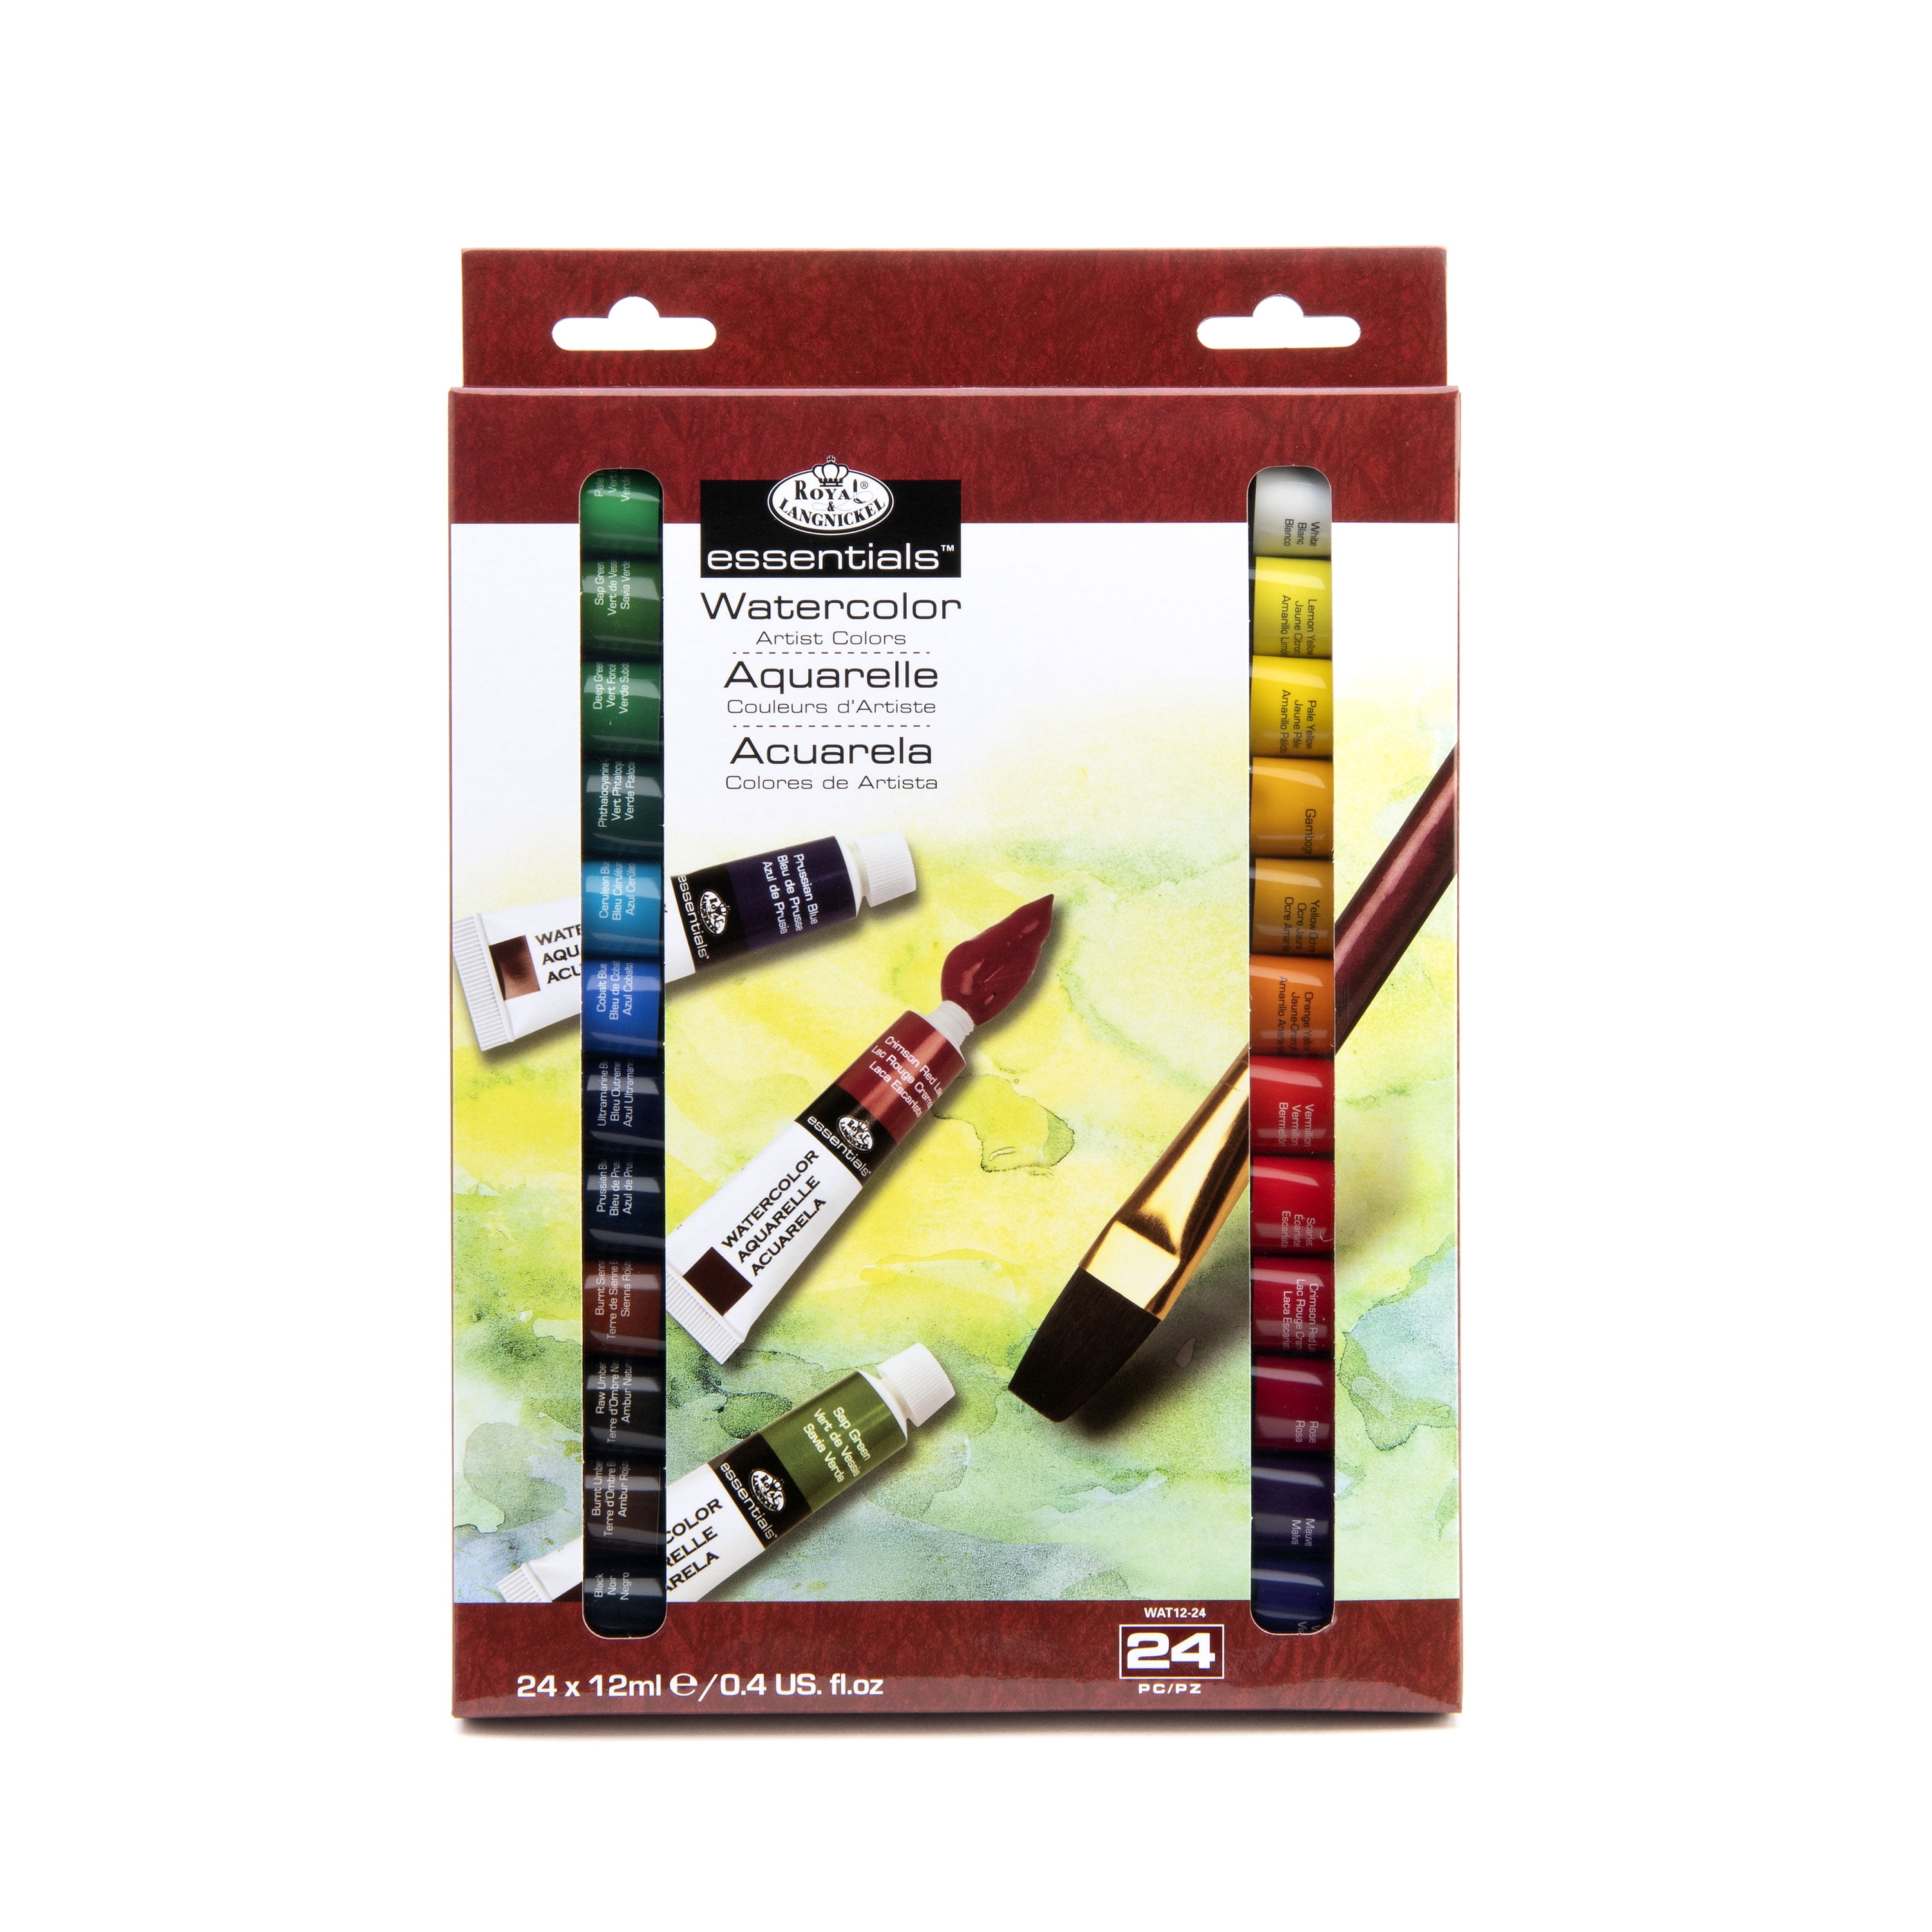 Watercolor Painting Kit Variety Pack 